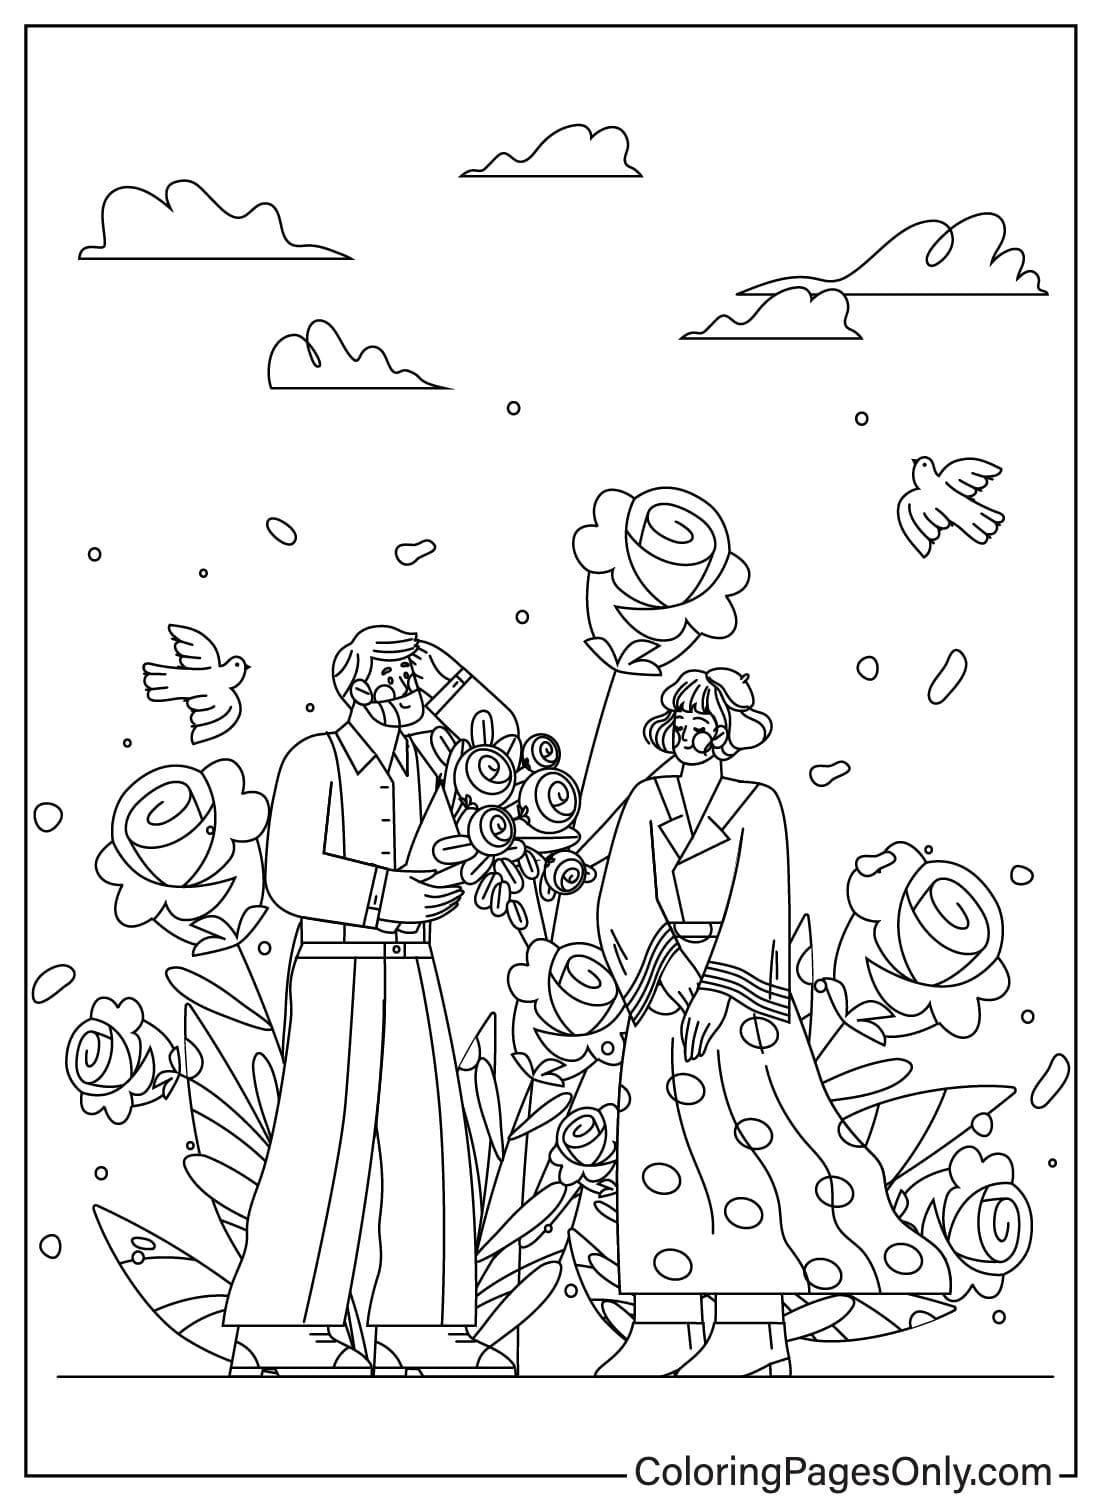 Printable Flower Bouquet Coloring Page from Flower Bouquet